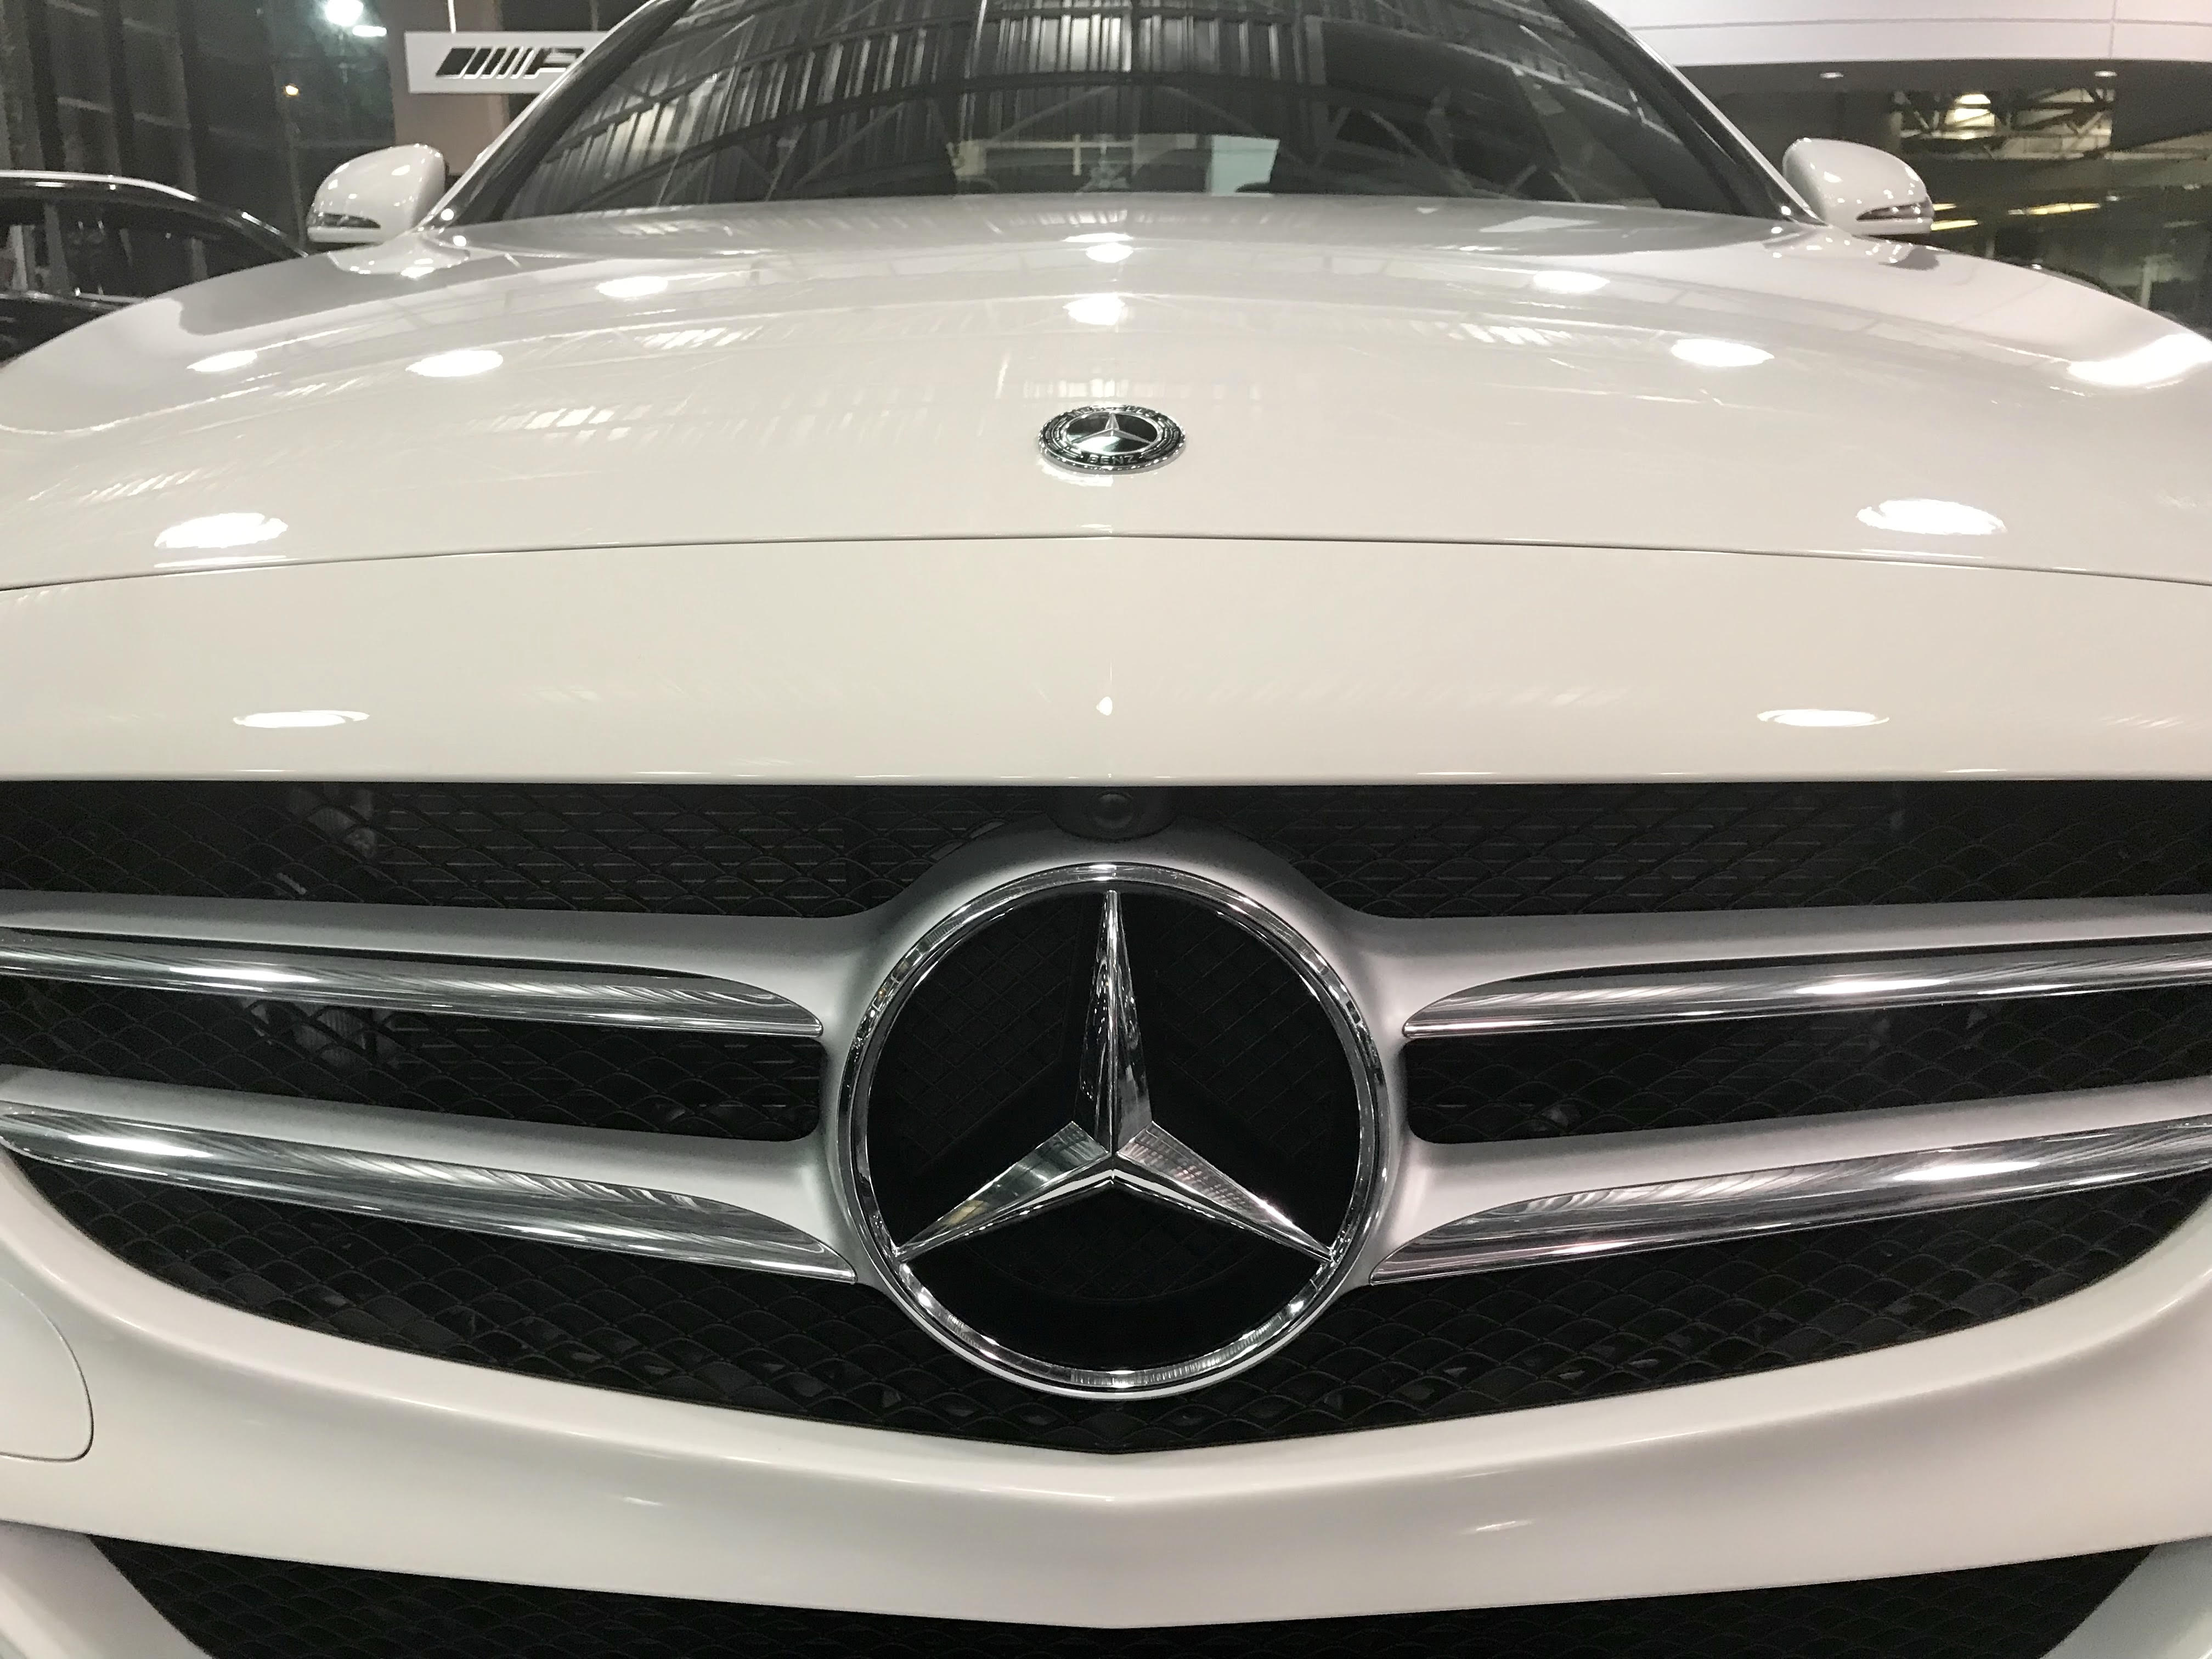 Mercedes-Benz West Island Lease Buyback Fees